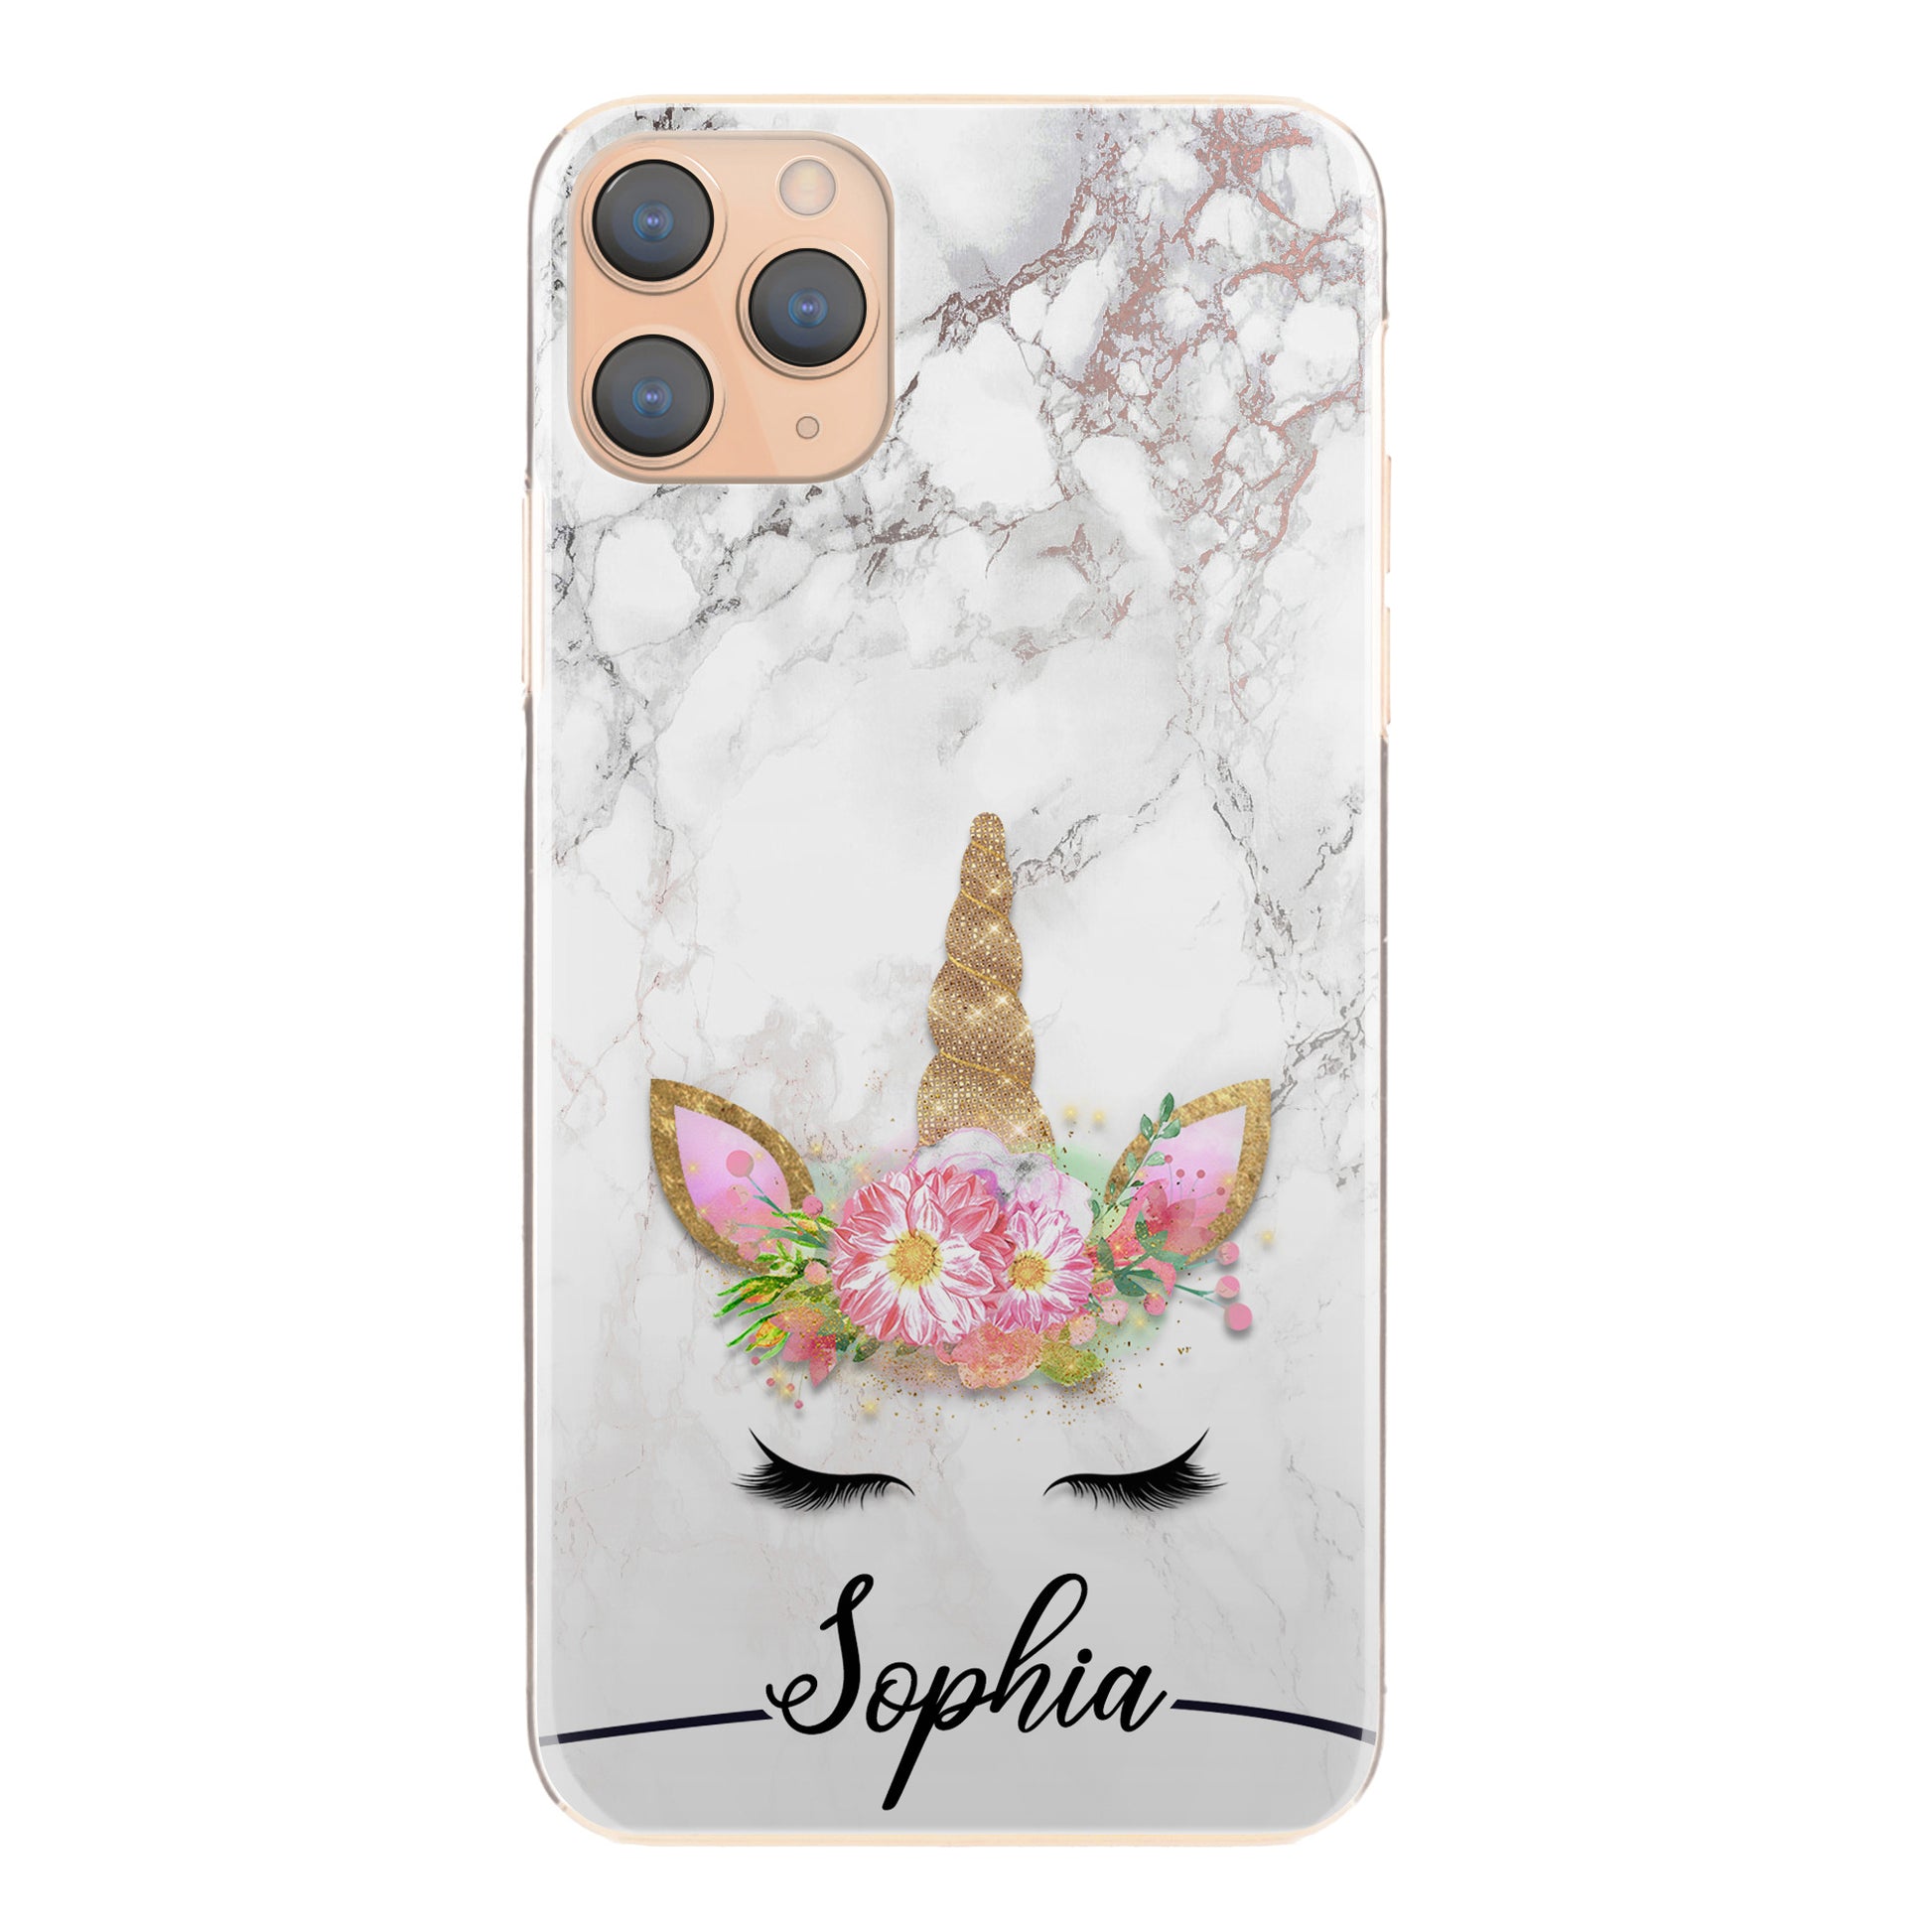 Personalised Huawei Phone Hard Case with Gold Floral Unicorn and Text on Grey Marble